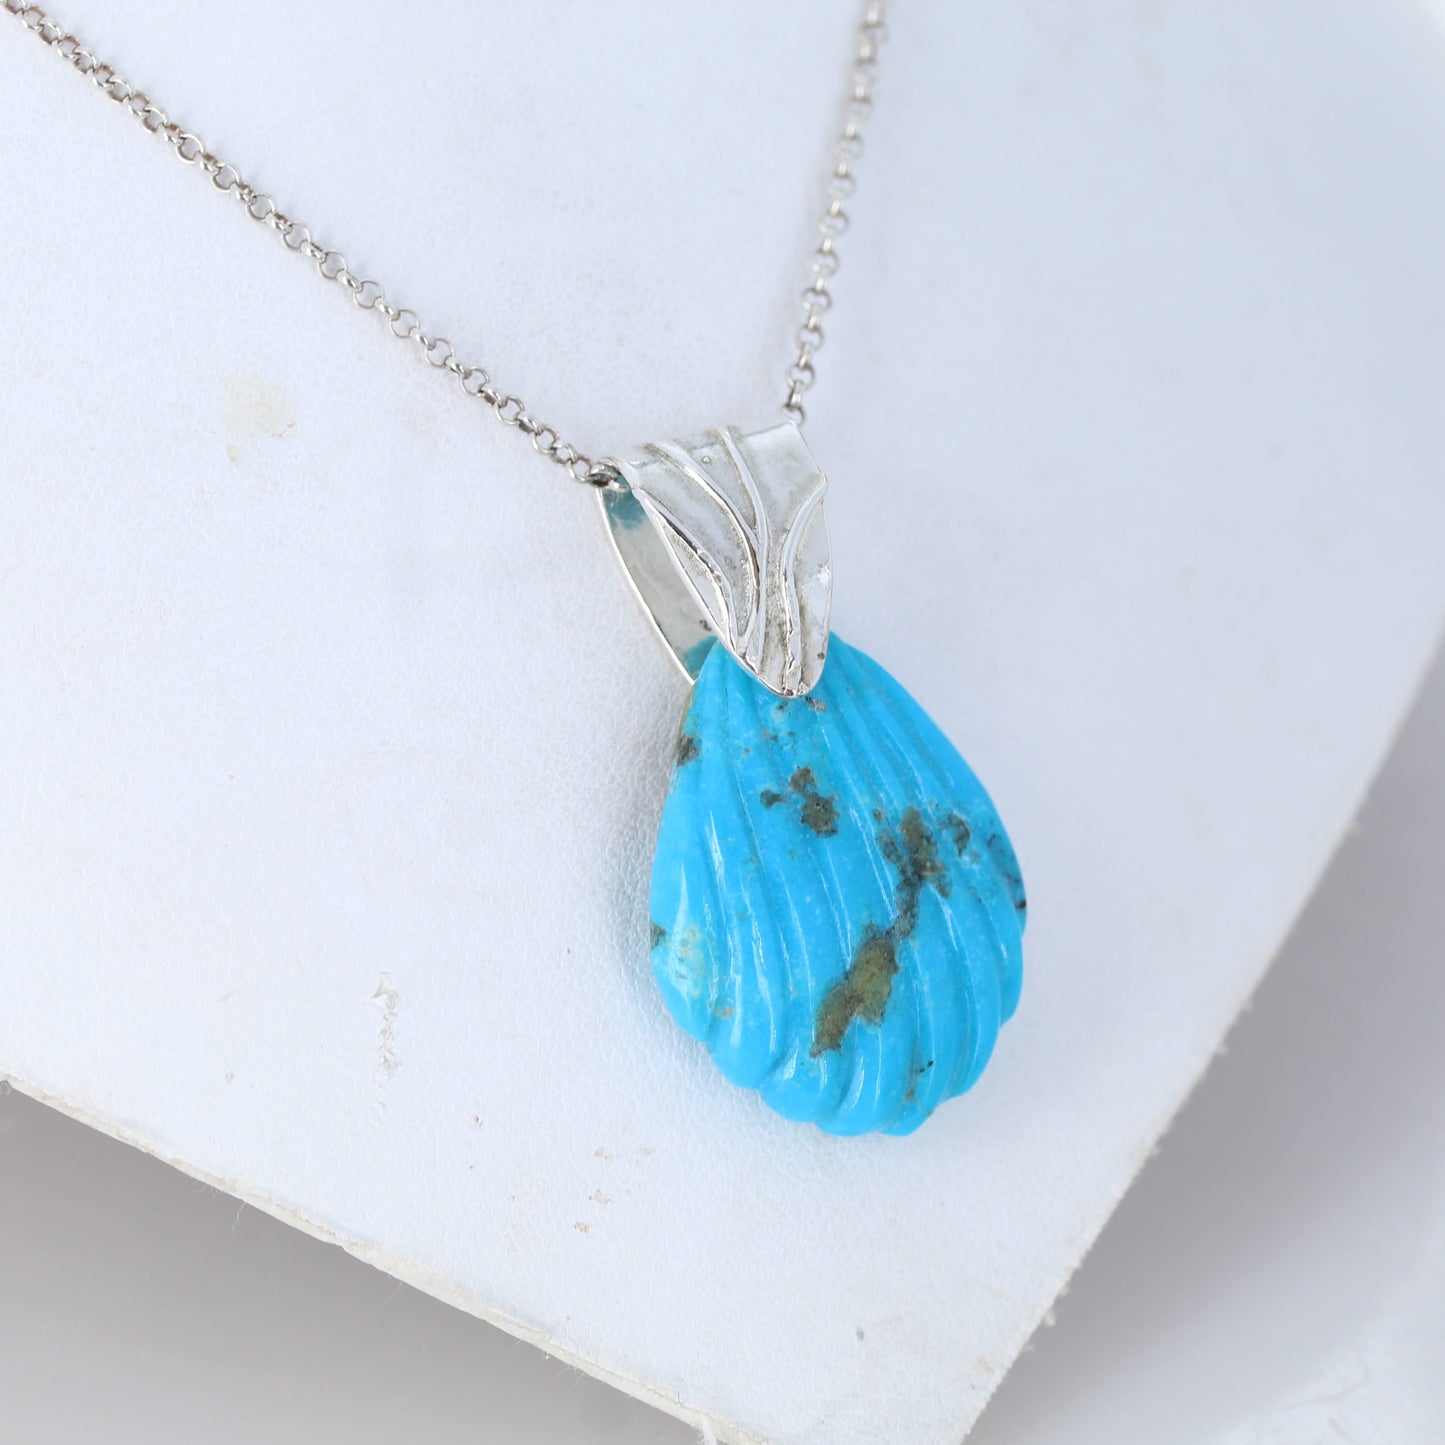 Exquisite Blue Turquoise Shell Pendant Sterling Silver Bail